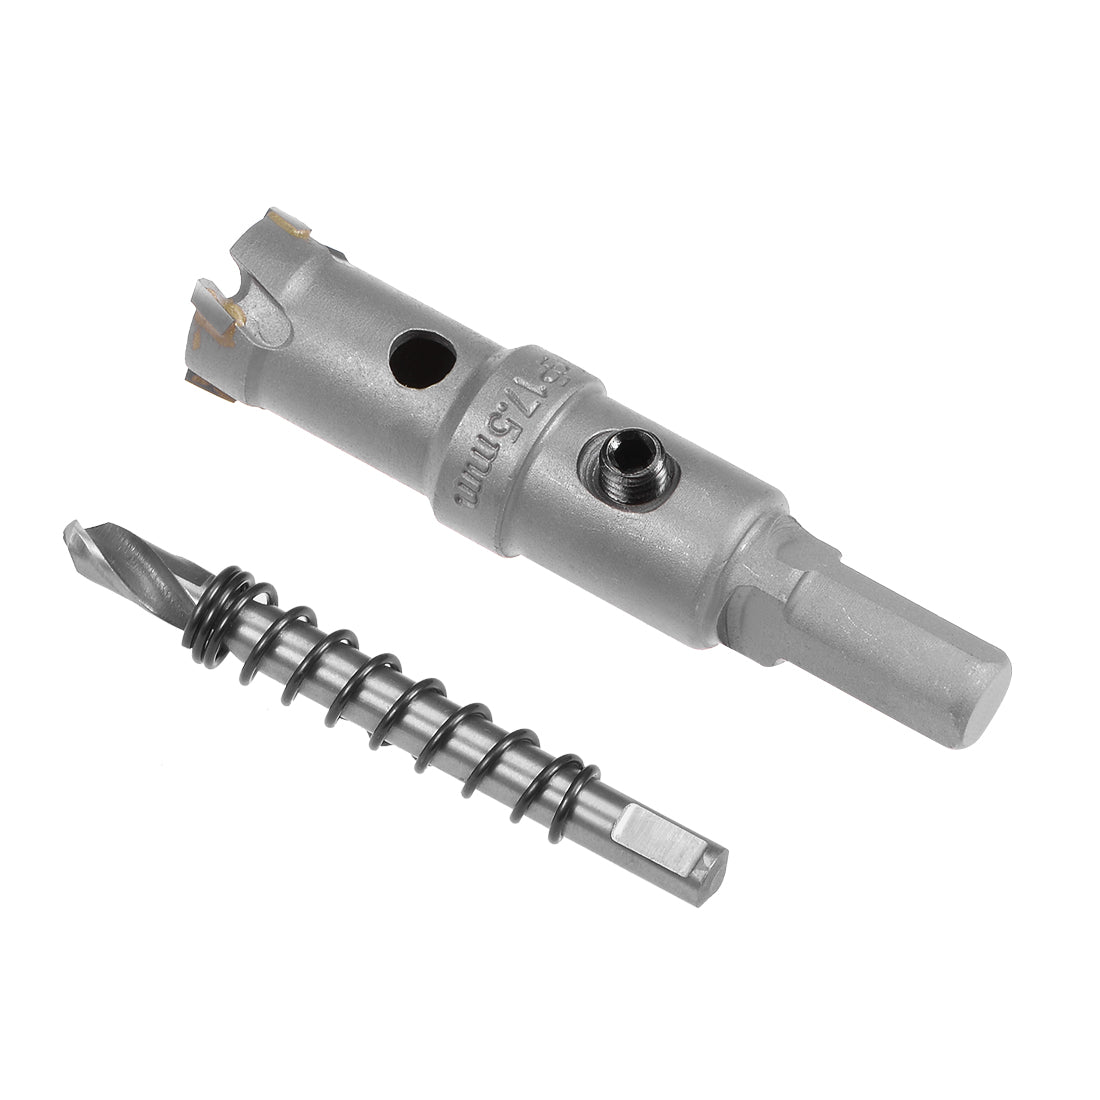 Uxcell Uxcell Carbide Hole Saw Cutter Drill Bits for Stainless Steel Alloy Metal, 24mm